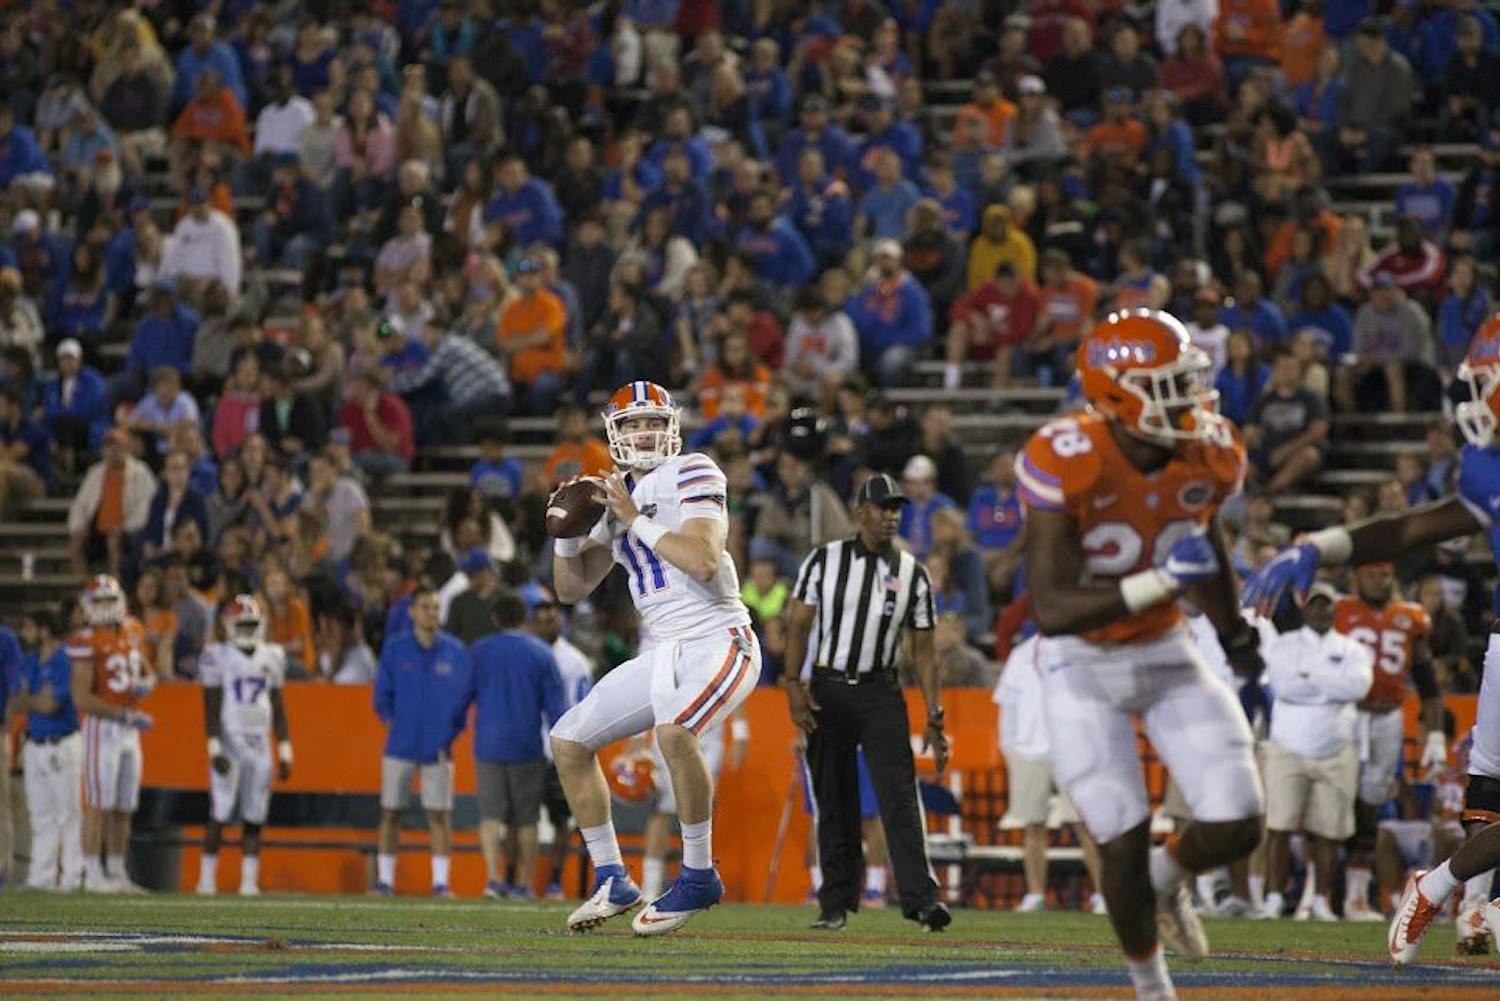 UF quarterback Kyle Trask drops back to pass during Florida's Spring game on April 7, 2017, at Ben Hill Griffin Stadium.